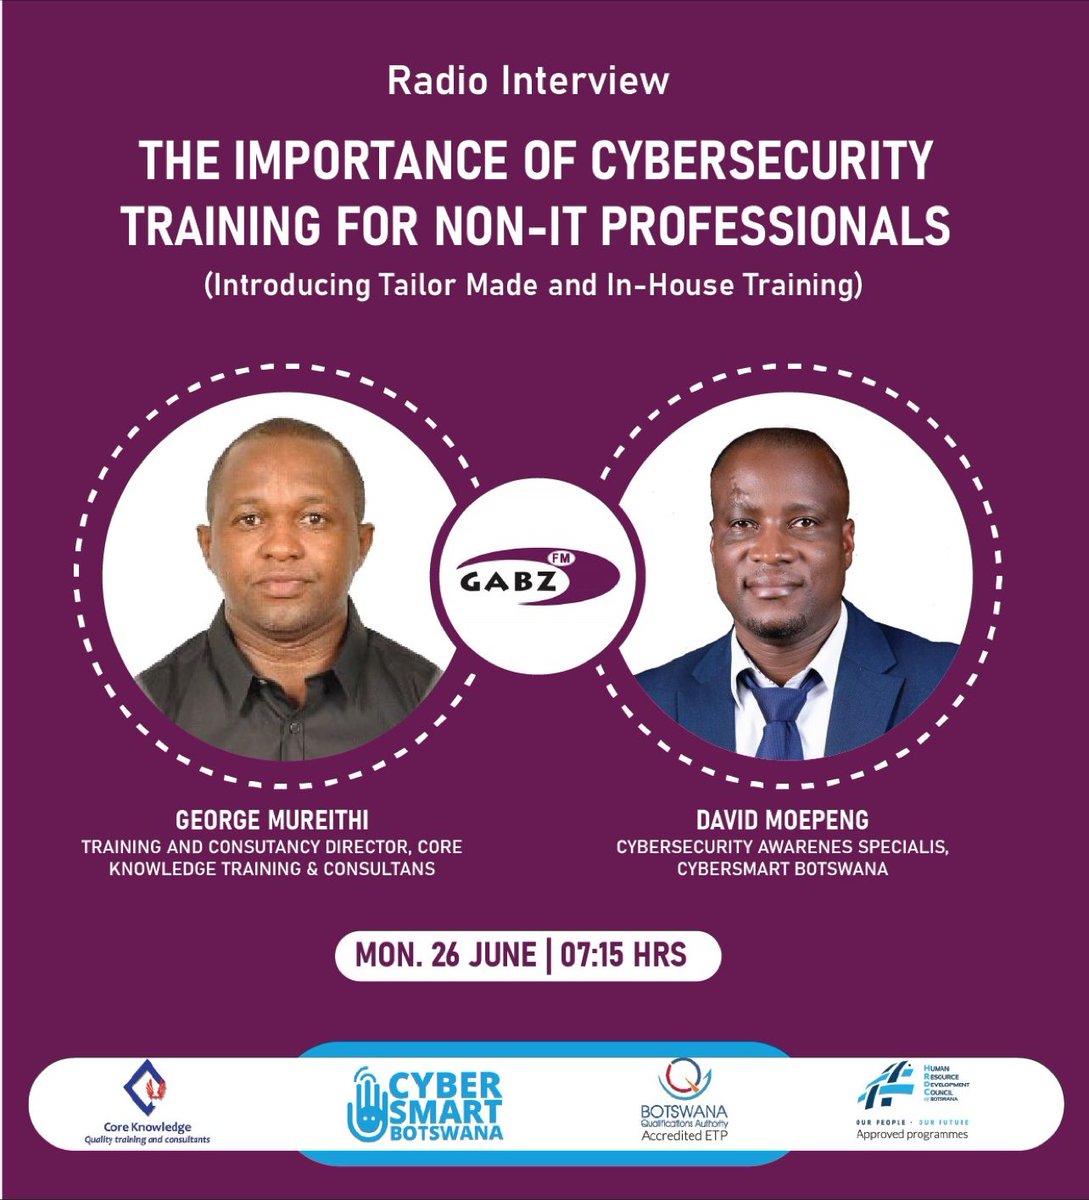 Join us in the morning as we will be sharing details on our Tailor Made and In-House Training Sessions under our Cybersecurity for Non-IT Professionals Course.
#BeCybersmart